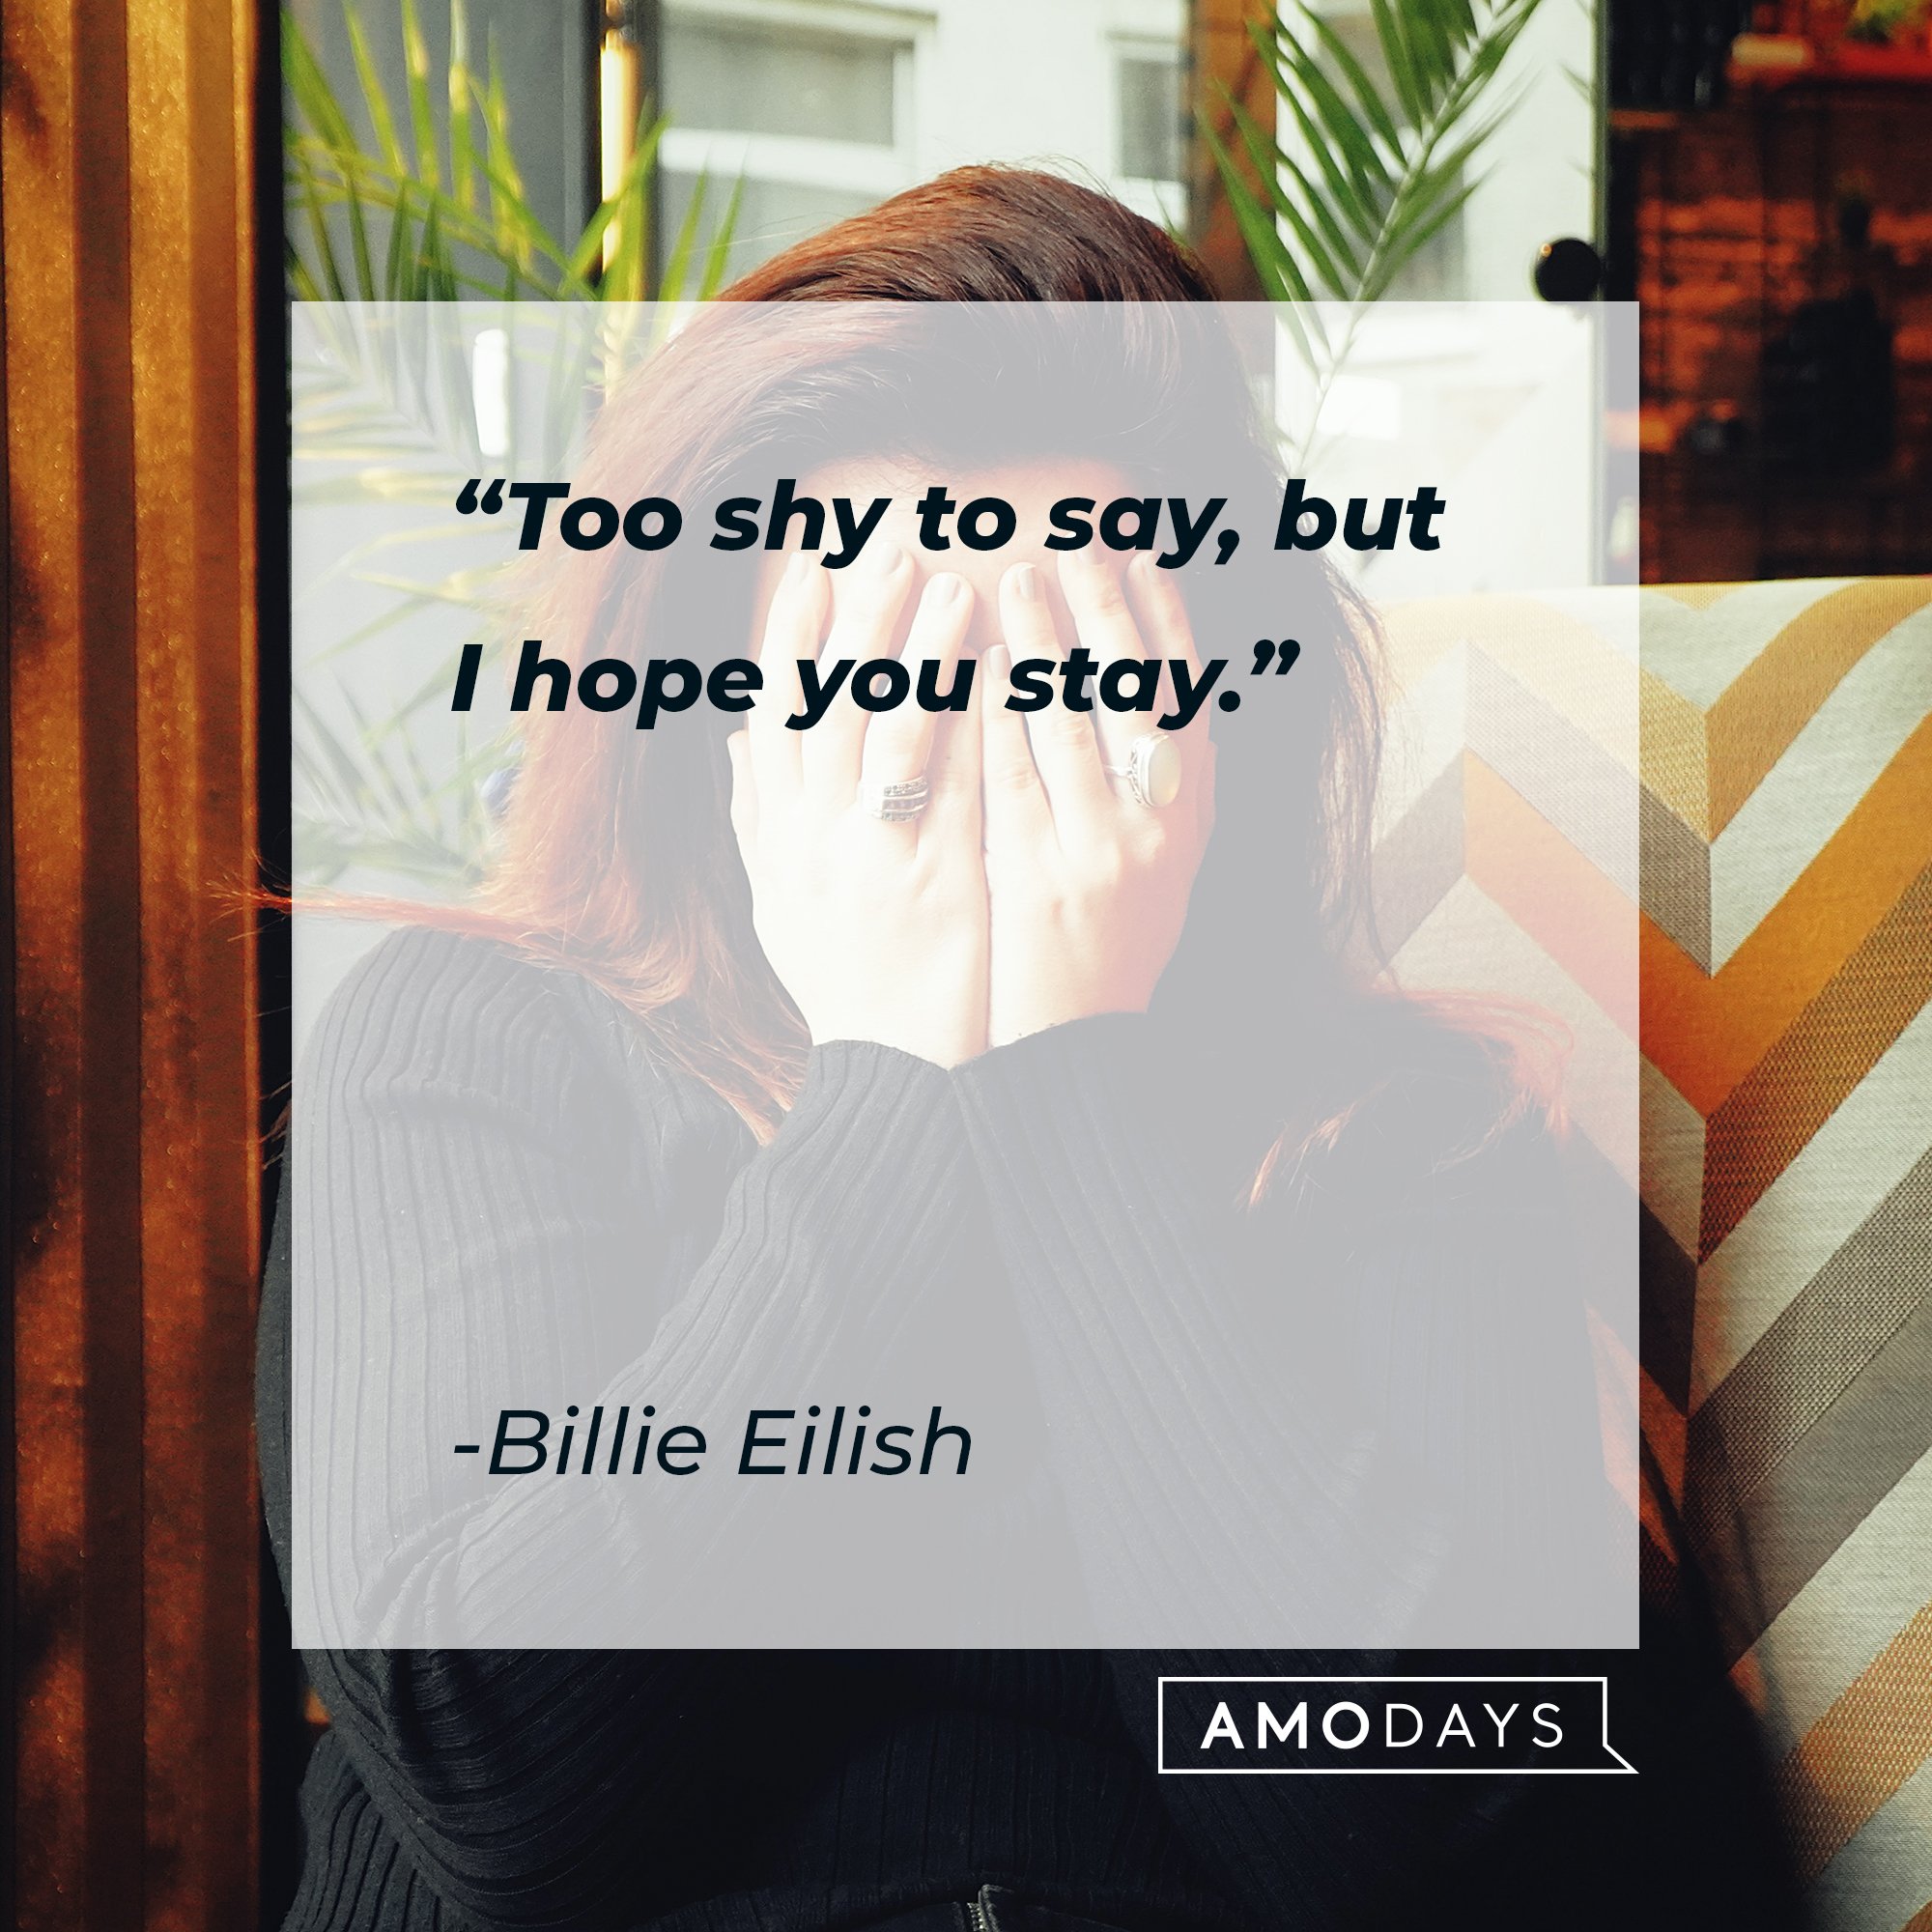 Billie Eilish's quote: “Too shy to say, but I hope you stay.” | Image: AmoDays